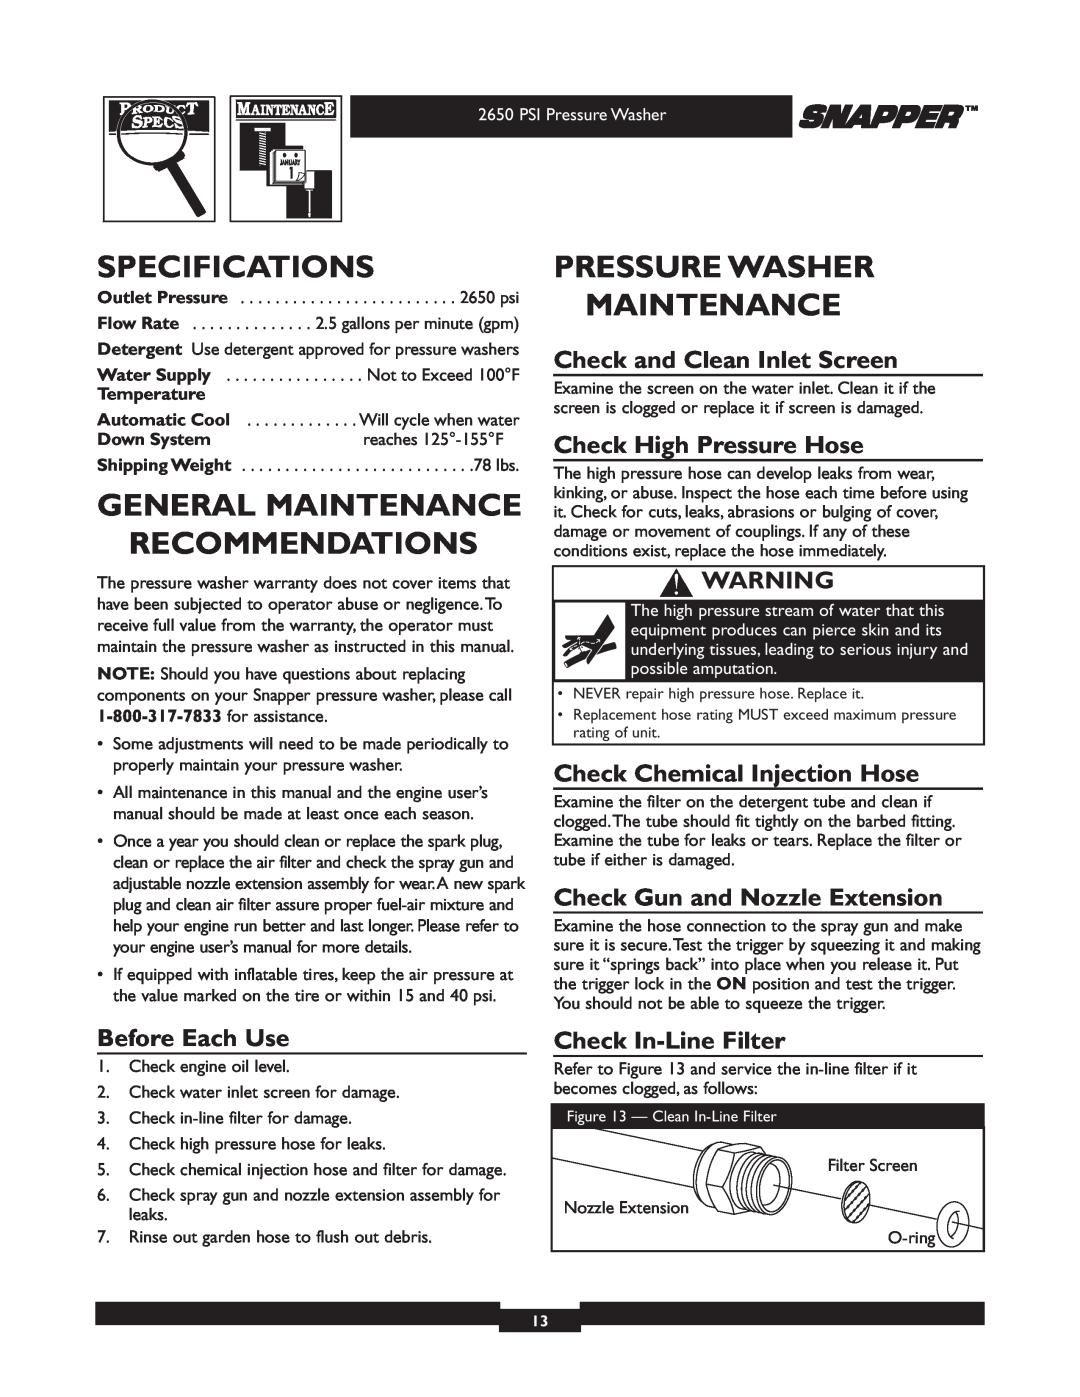 Snapper 020230 Specifications, General Maintenance Recommendations, Pressure Washer Maintenance, Check High Pressure Hose 